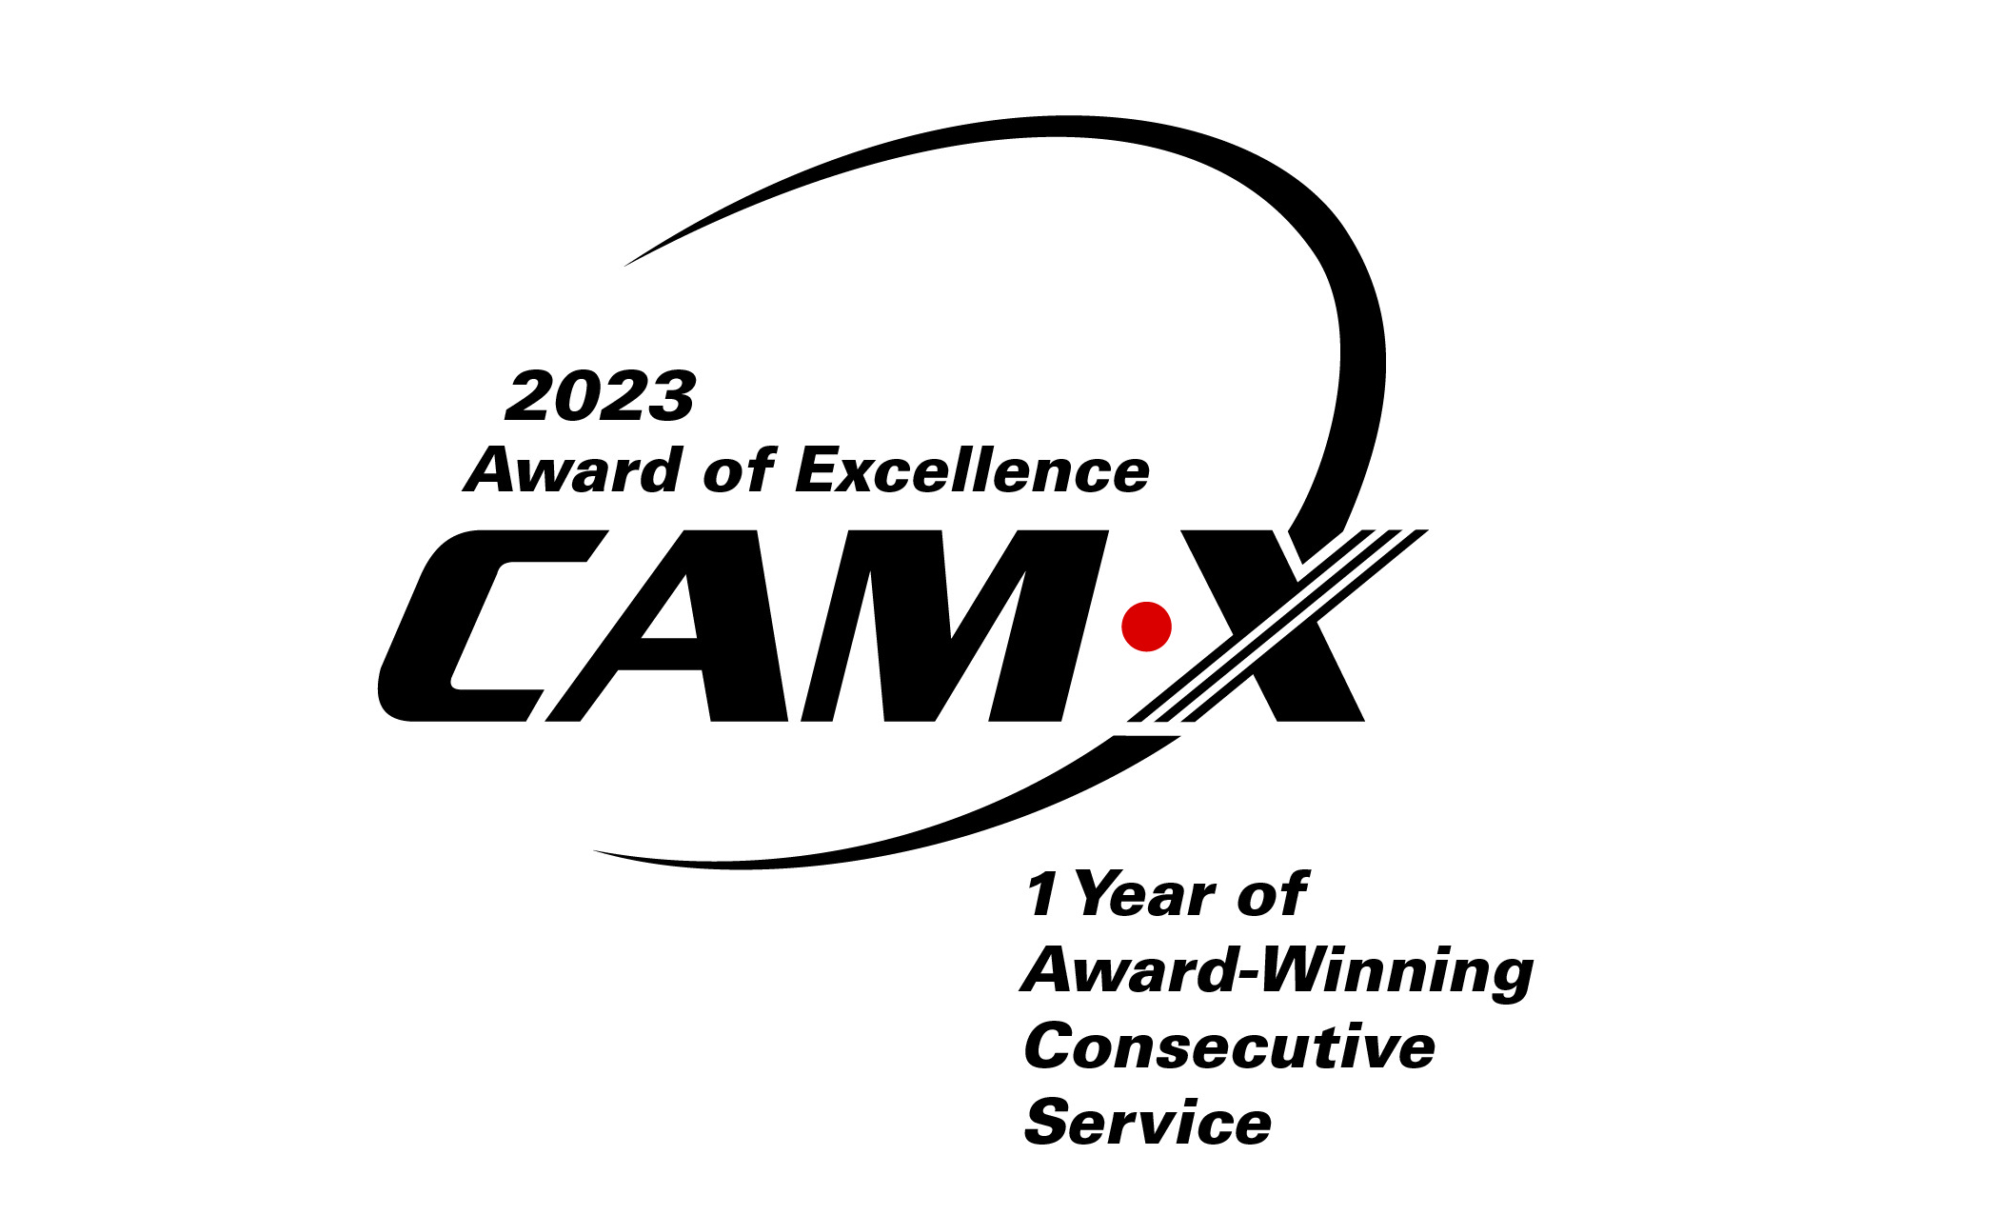 The CommAlert Group wins the 2023 Award of Excellence at the CAM-X Convention